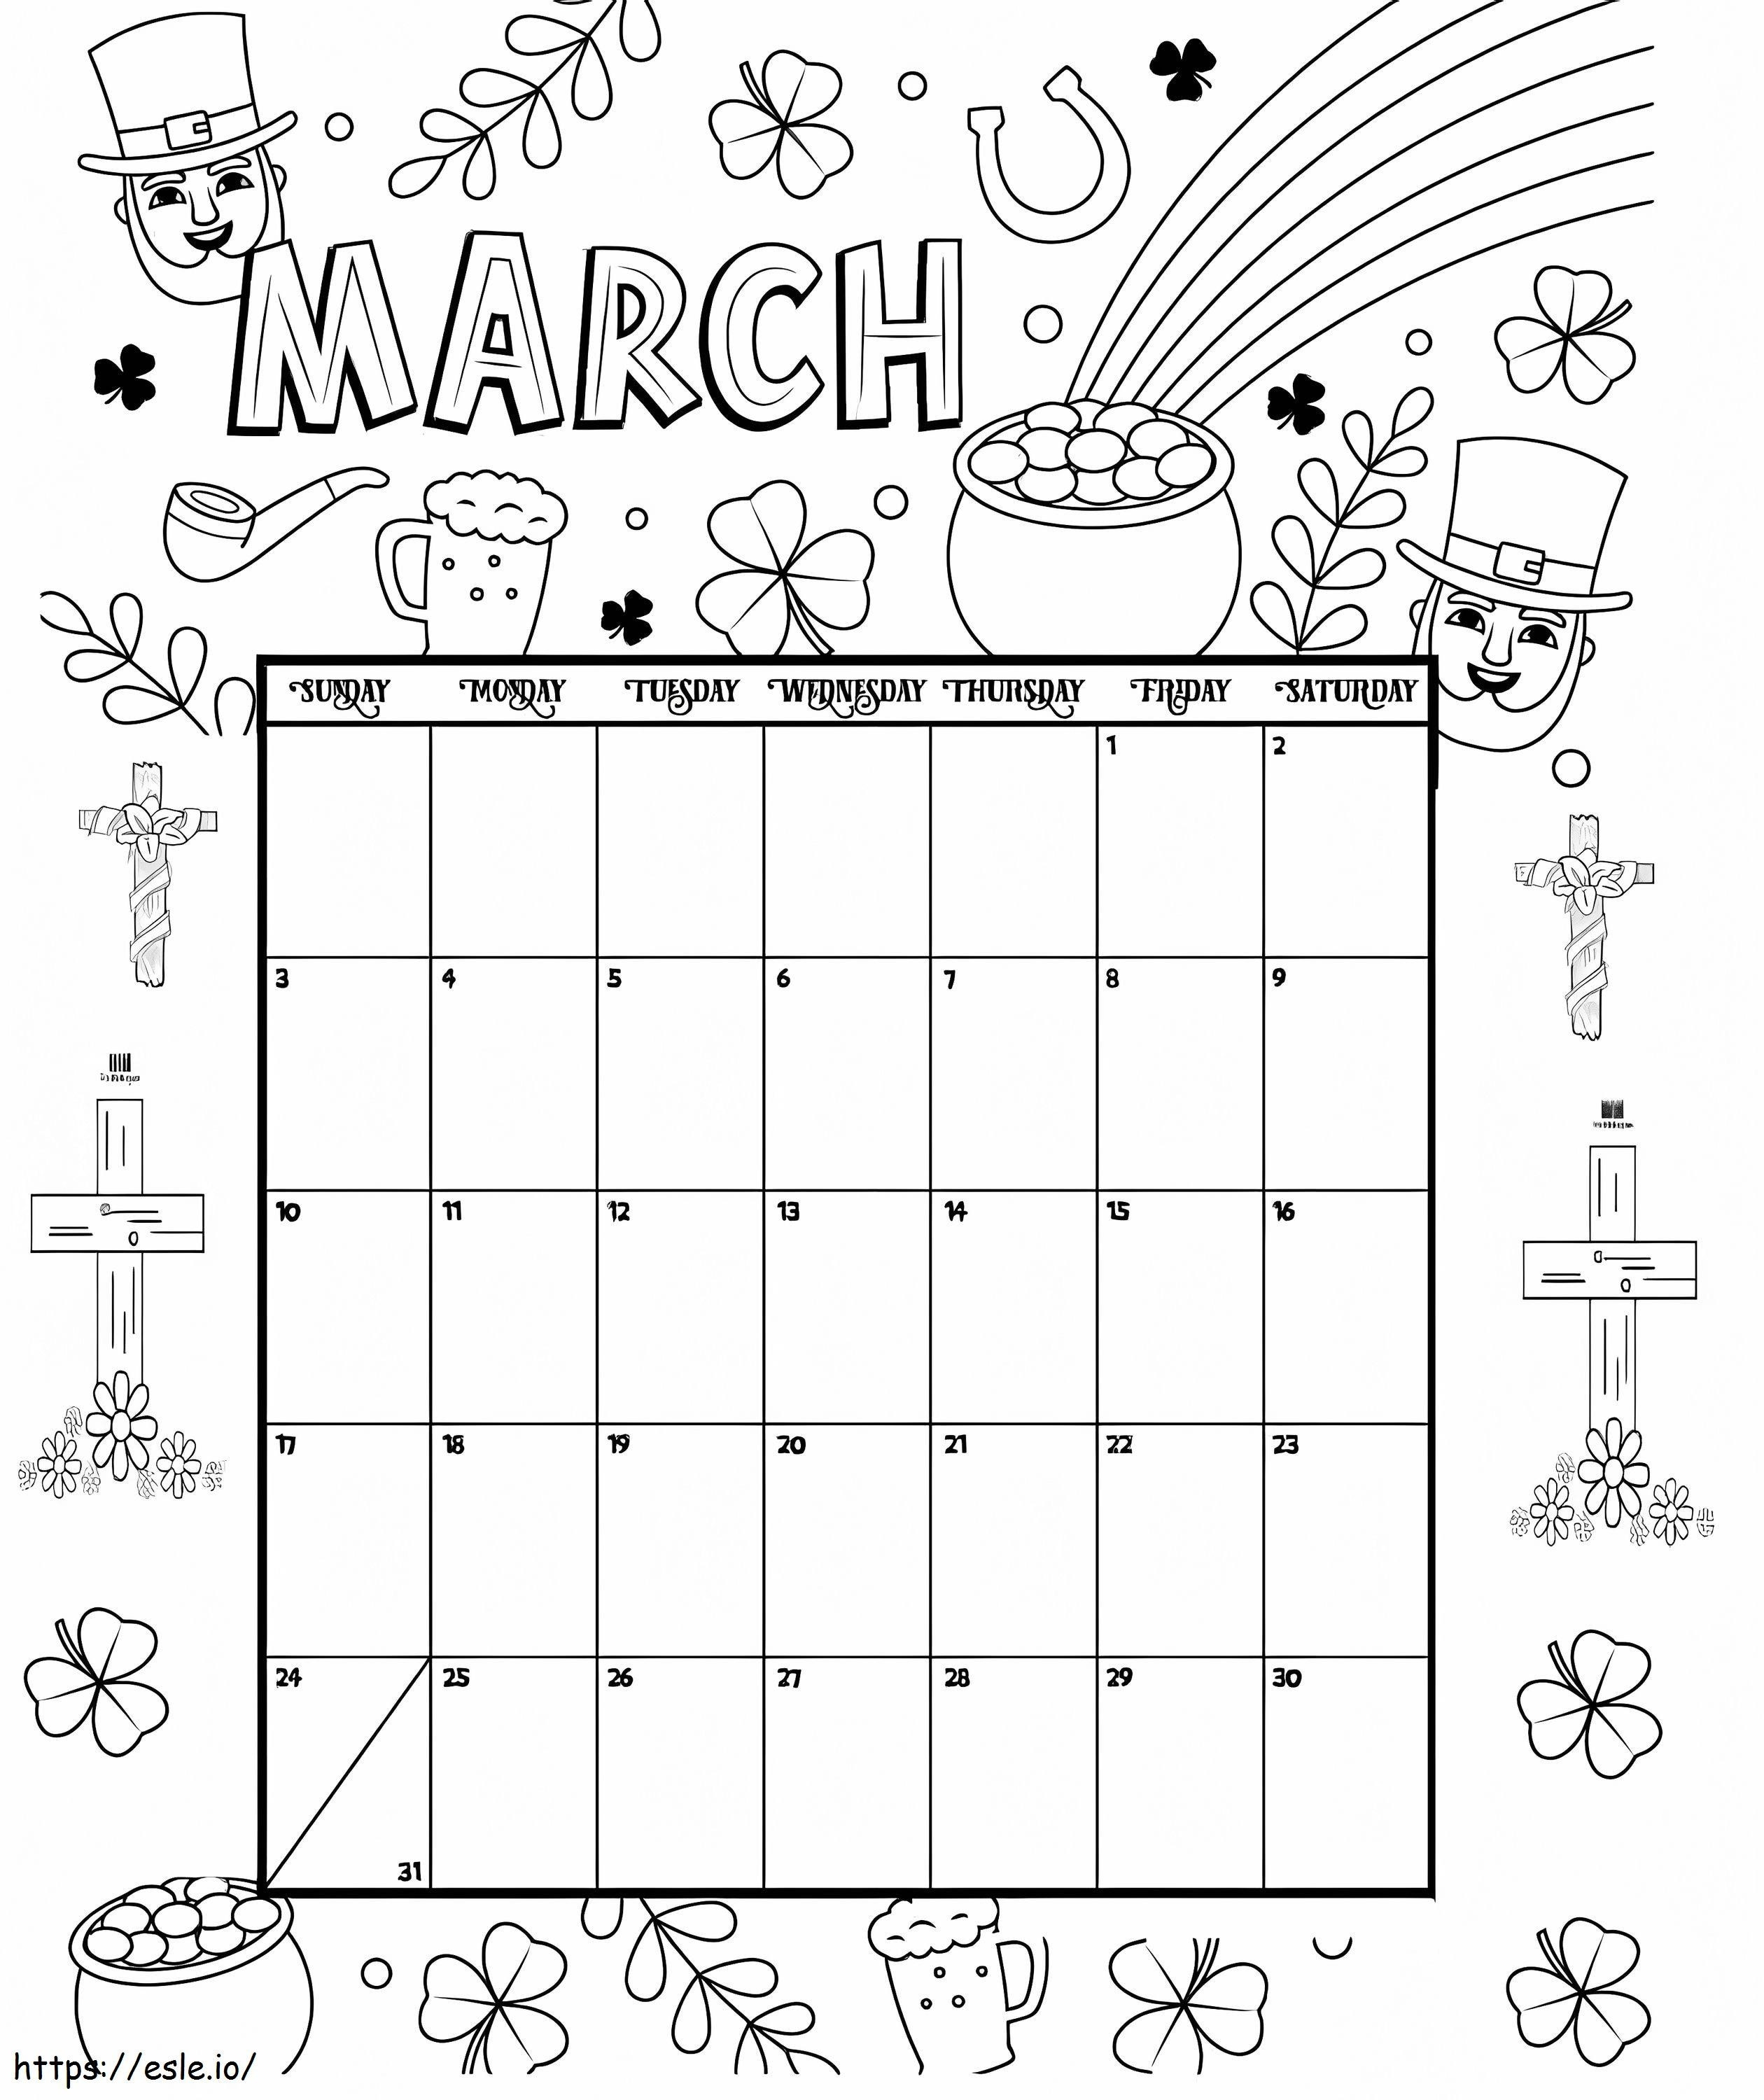 March Calendar coloring page